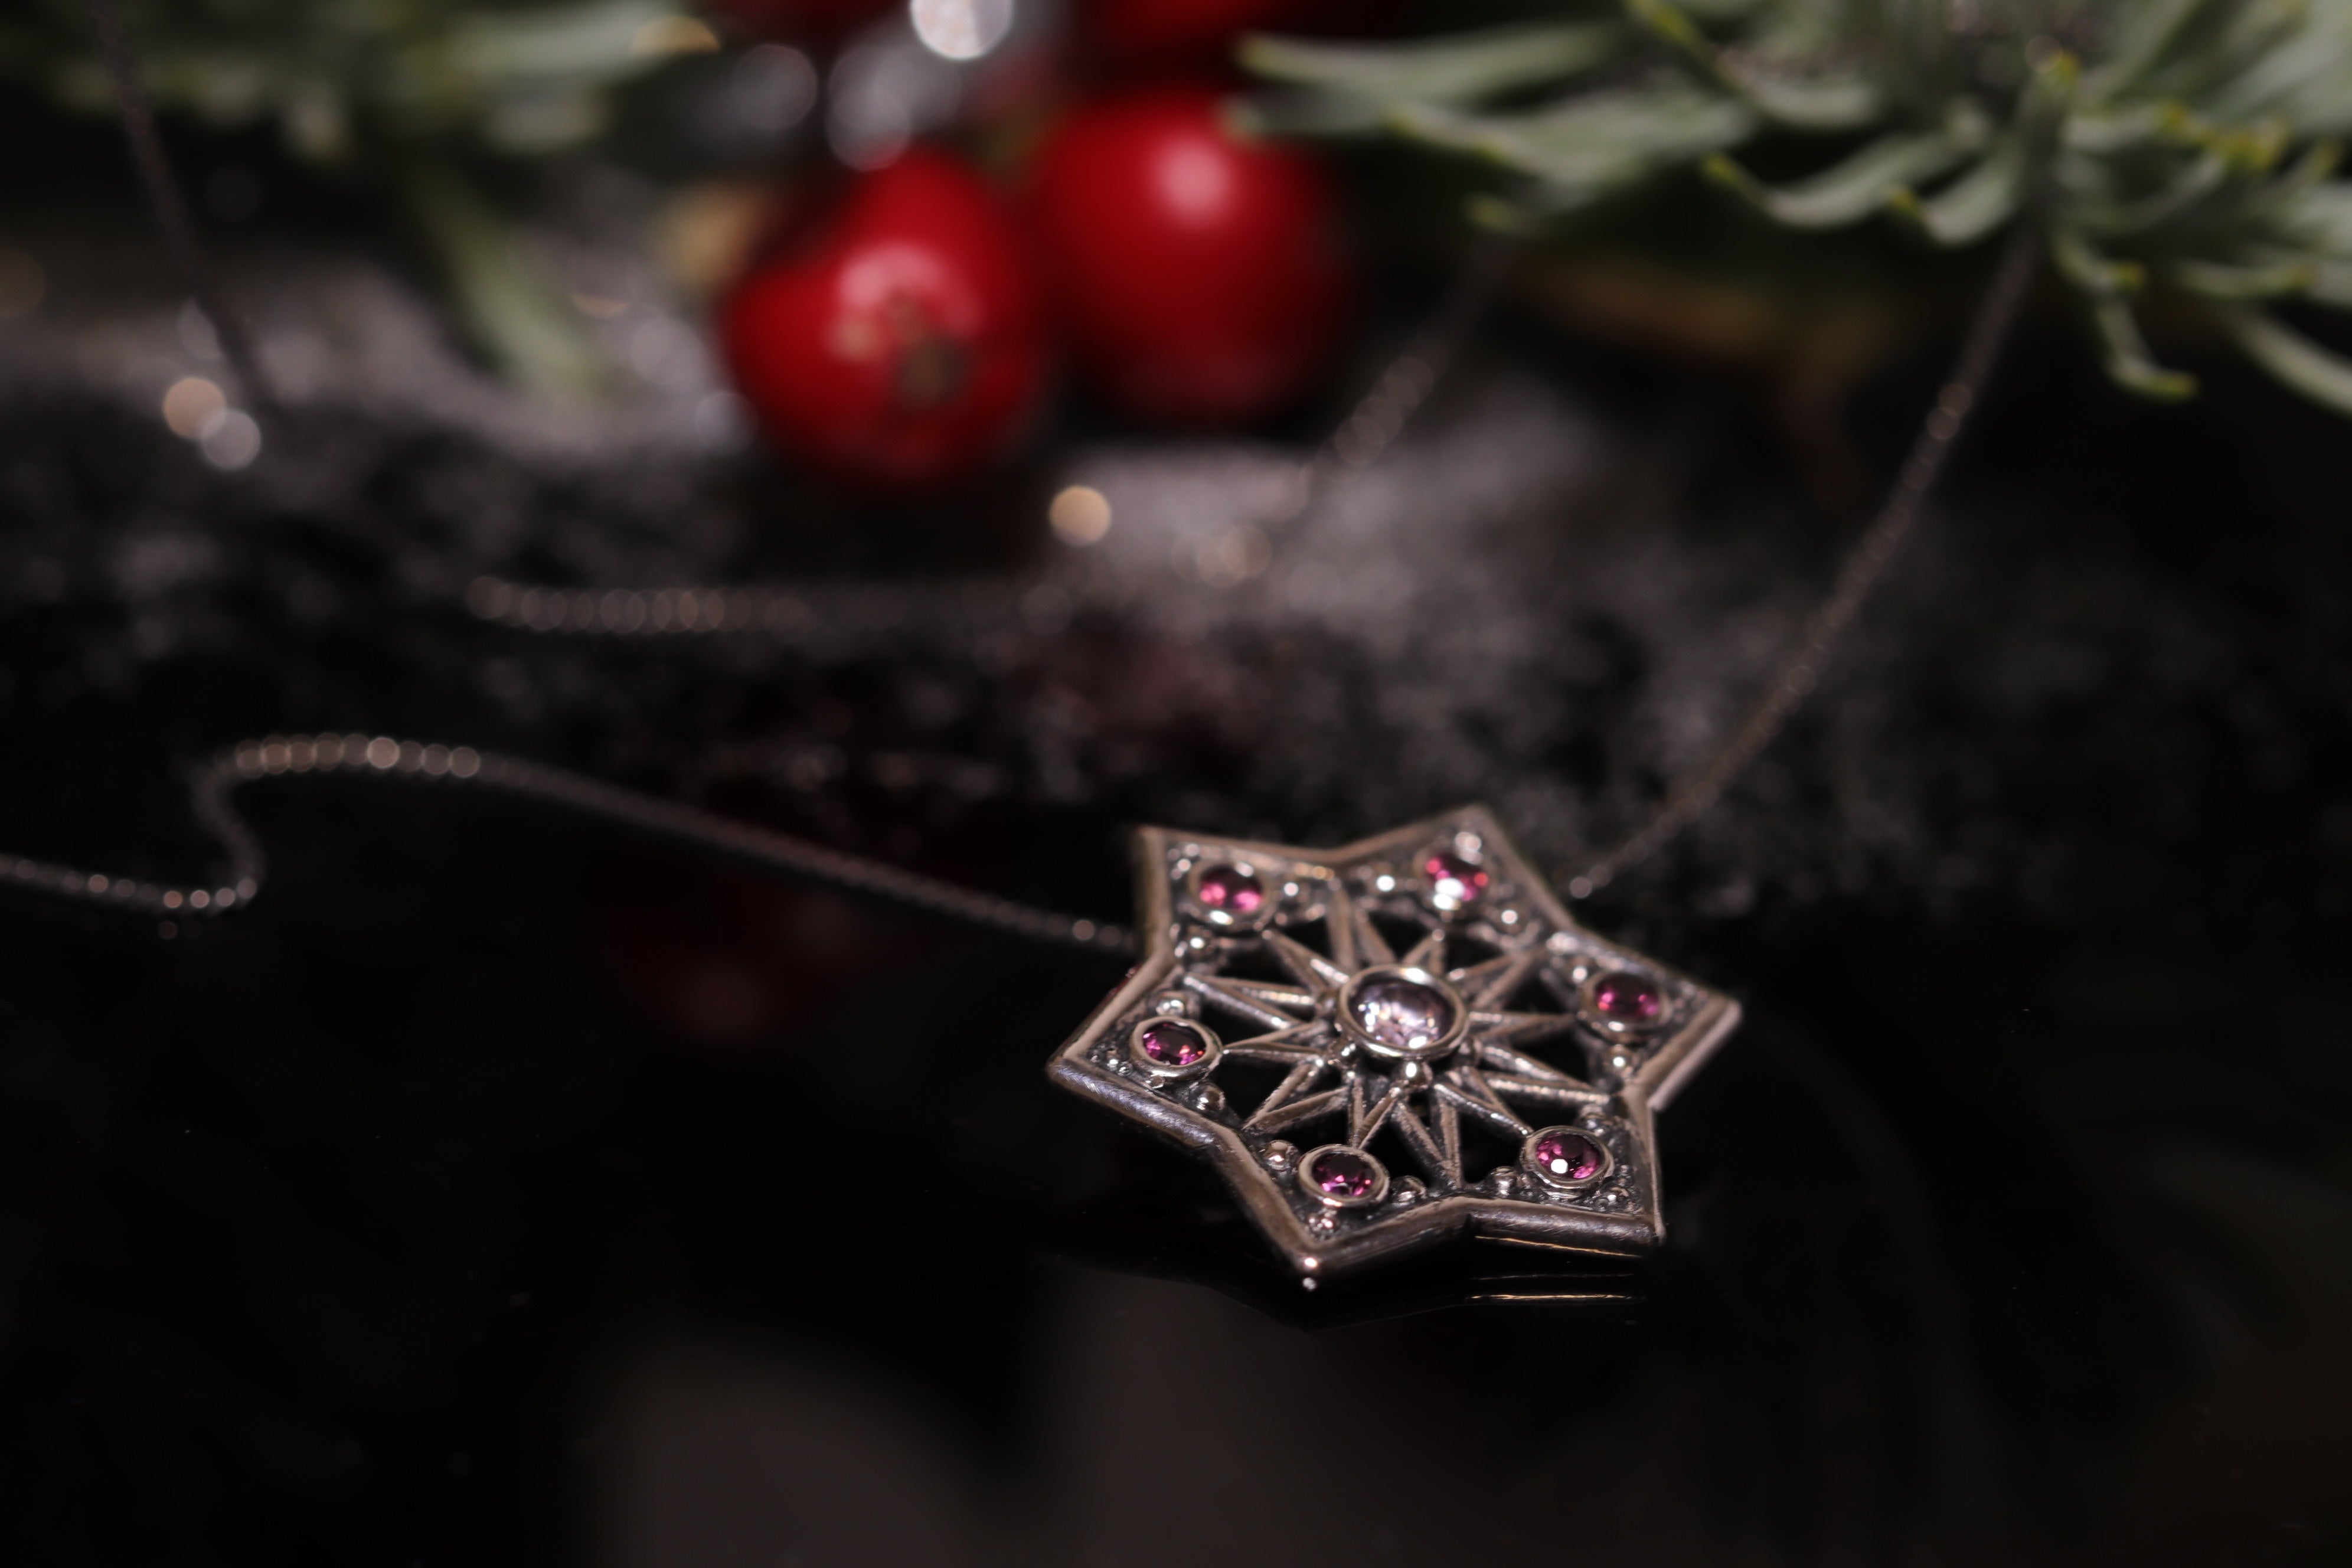 Silver Star-Snowflake Necklace